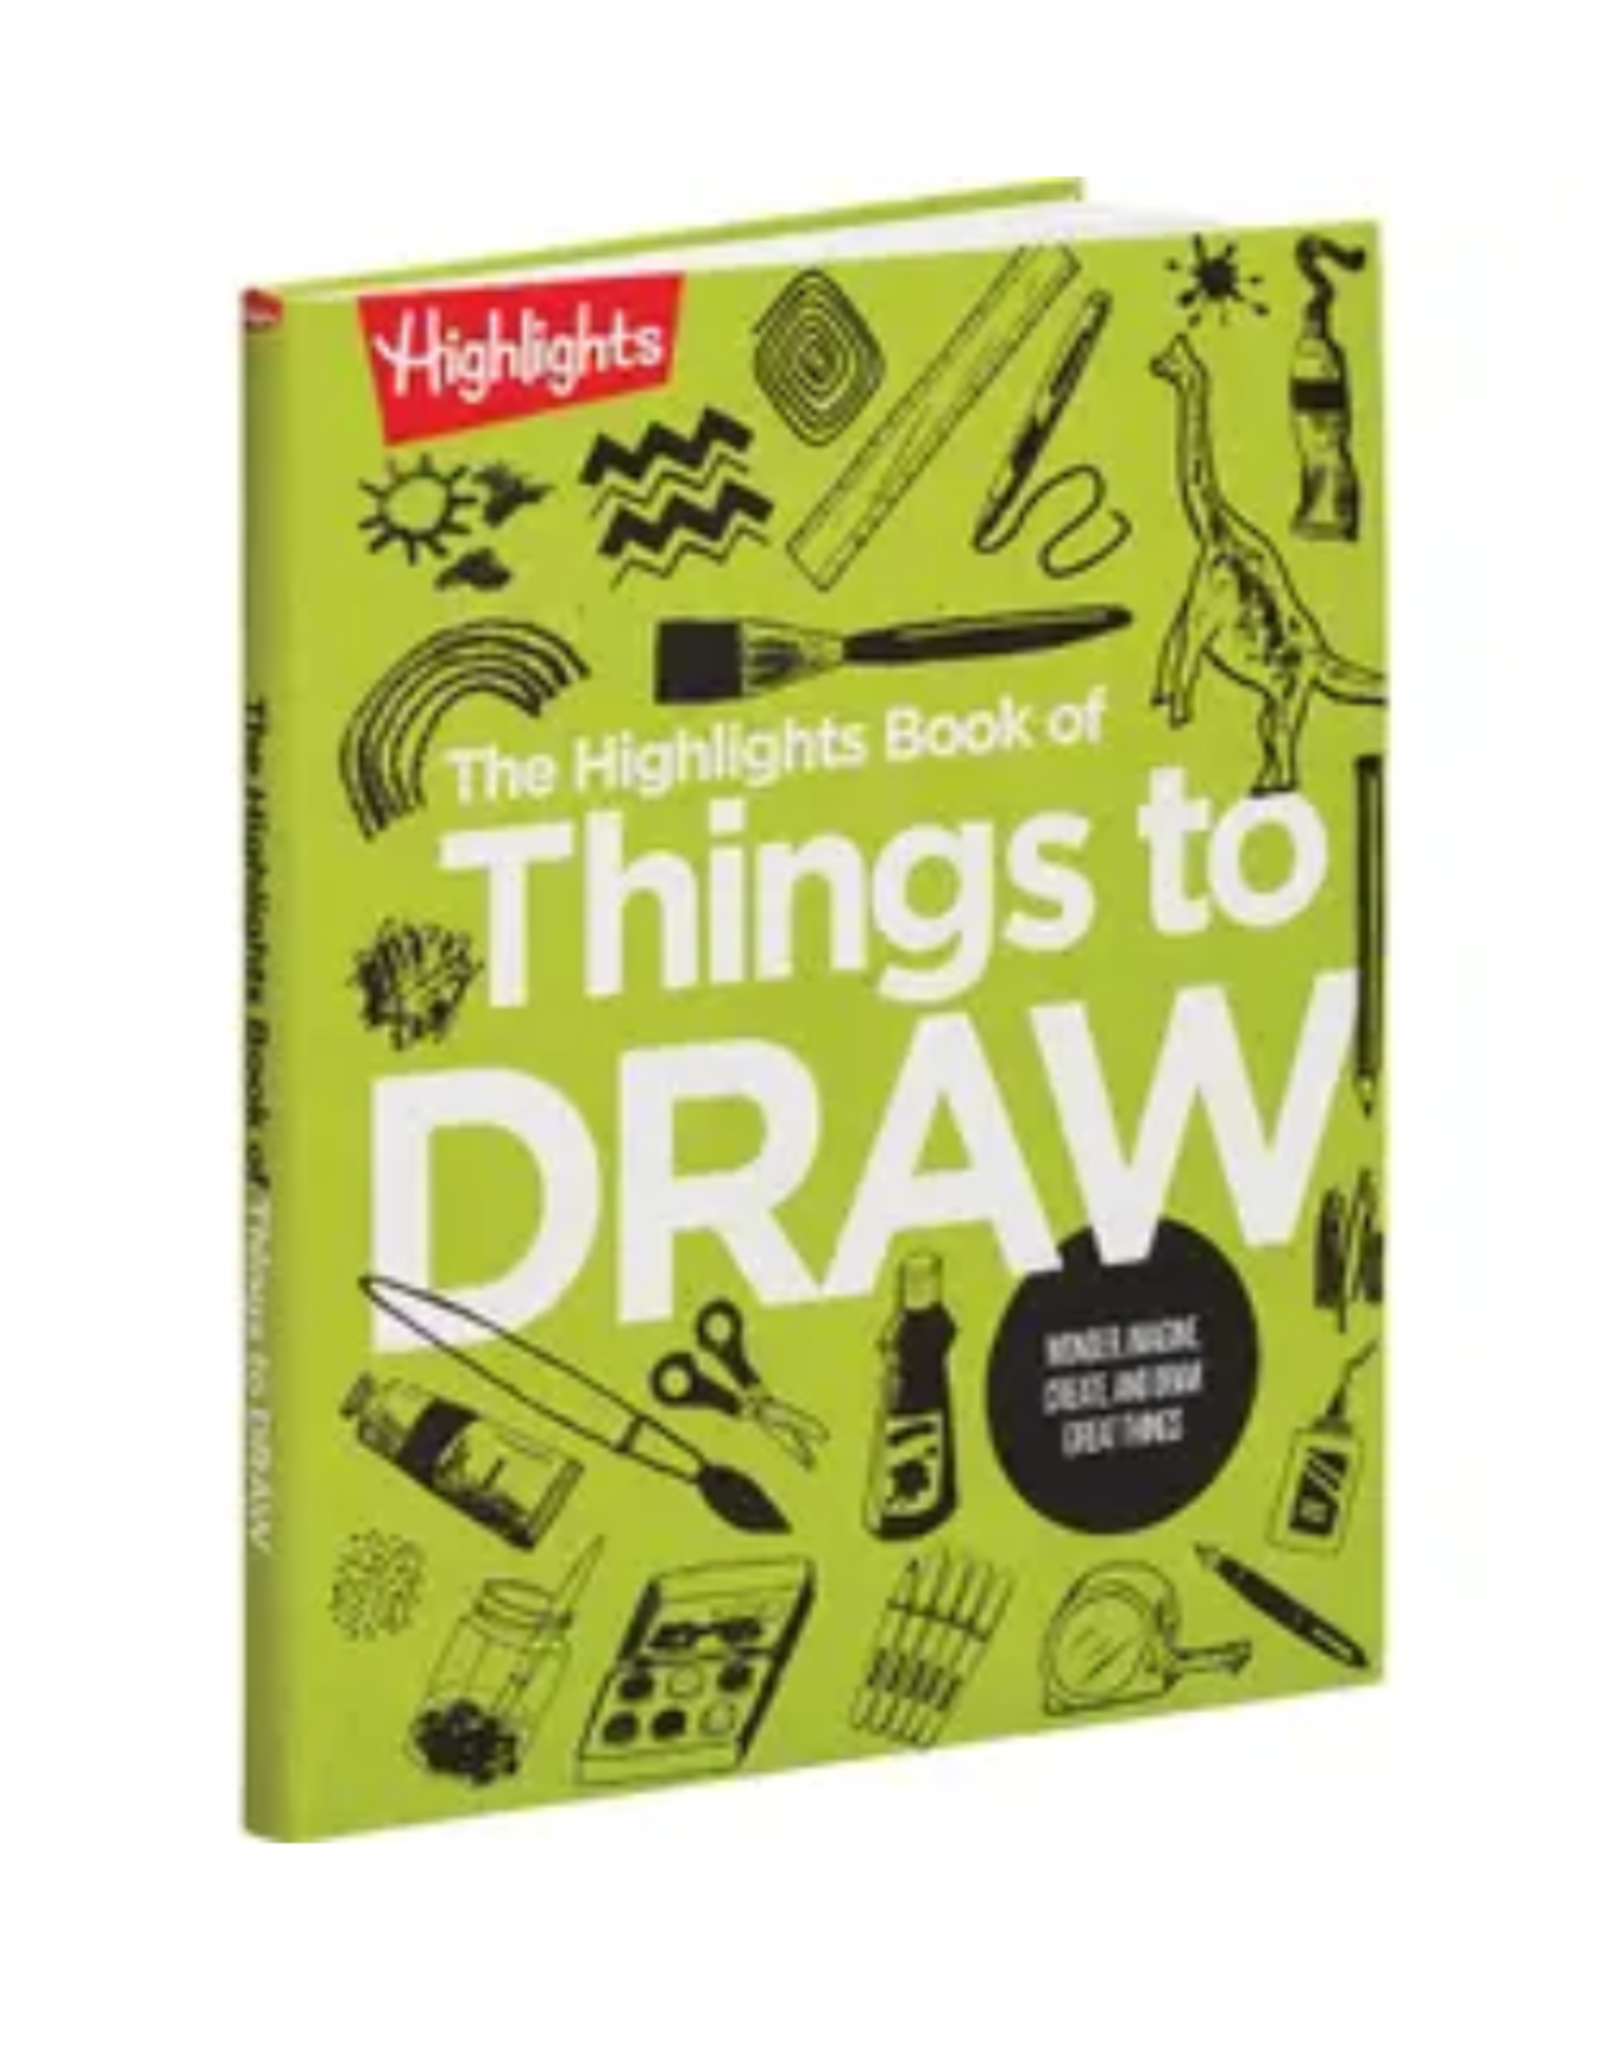 The Highlights Book of Things to Draw